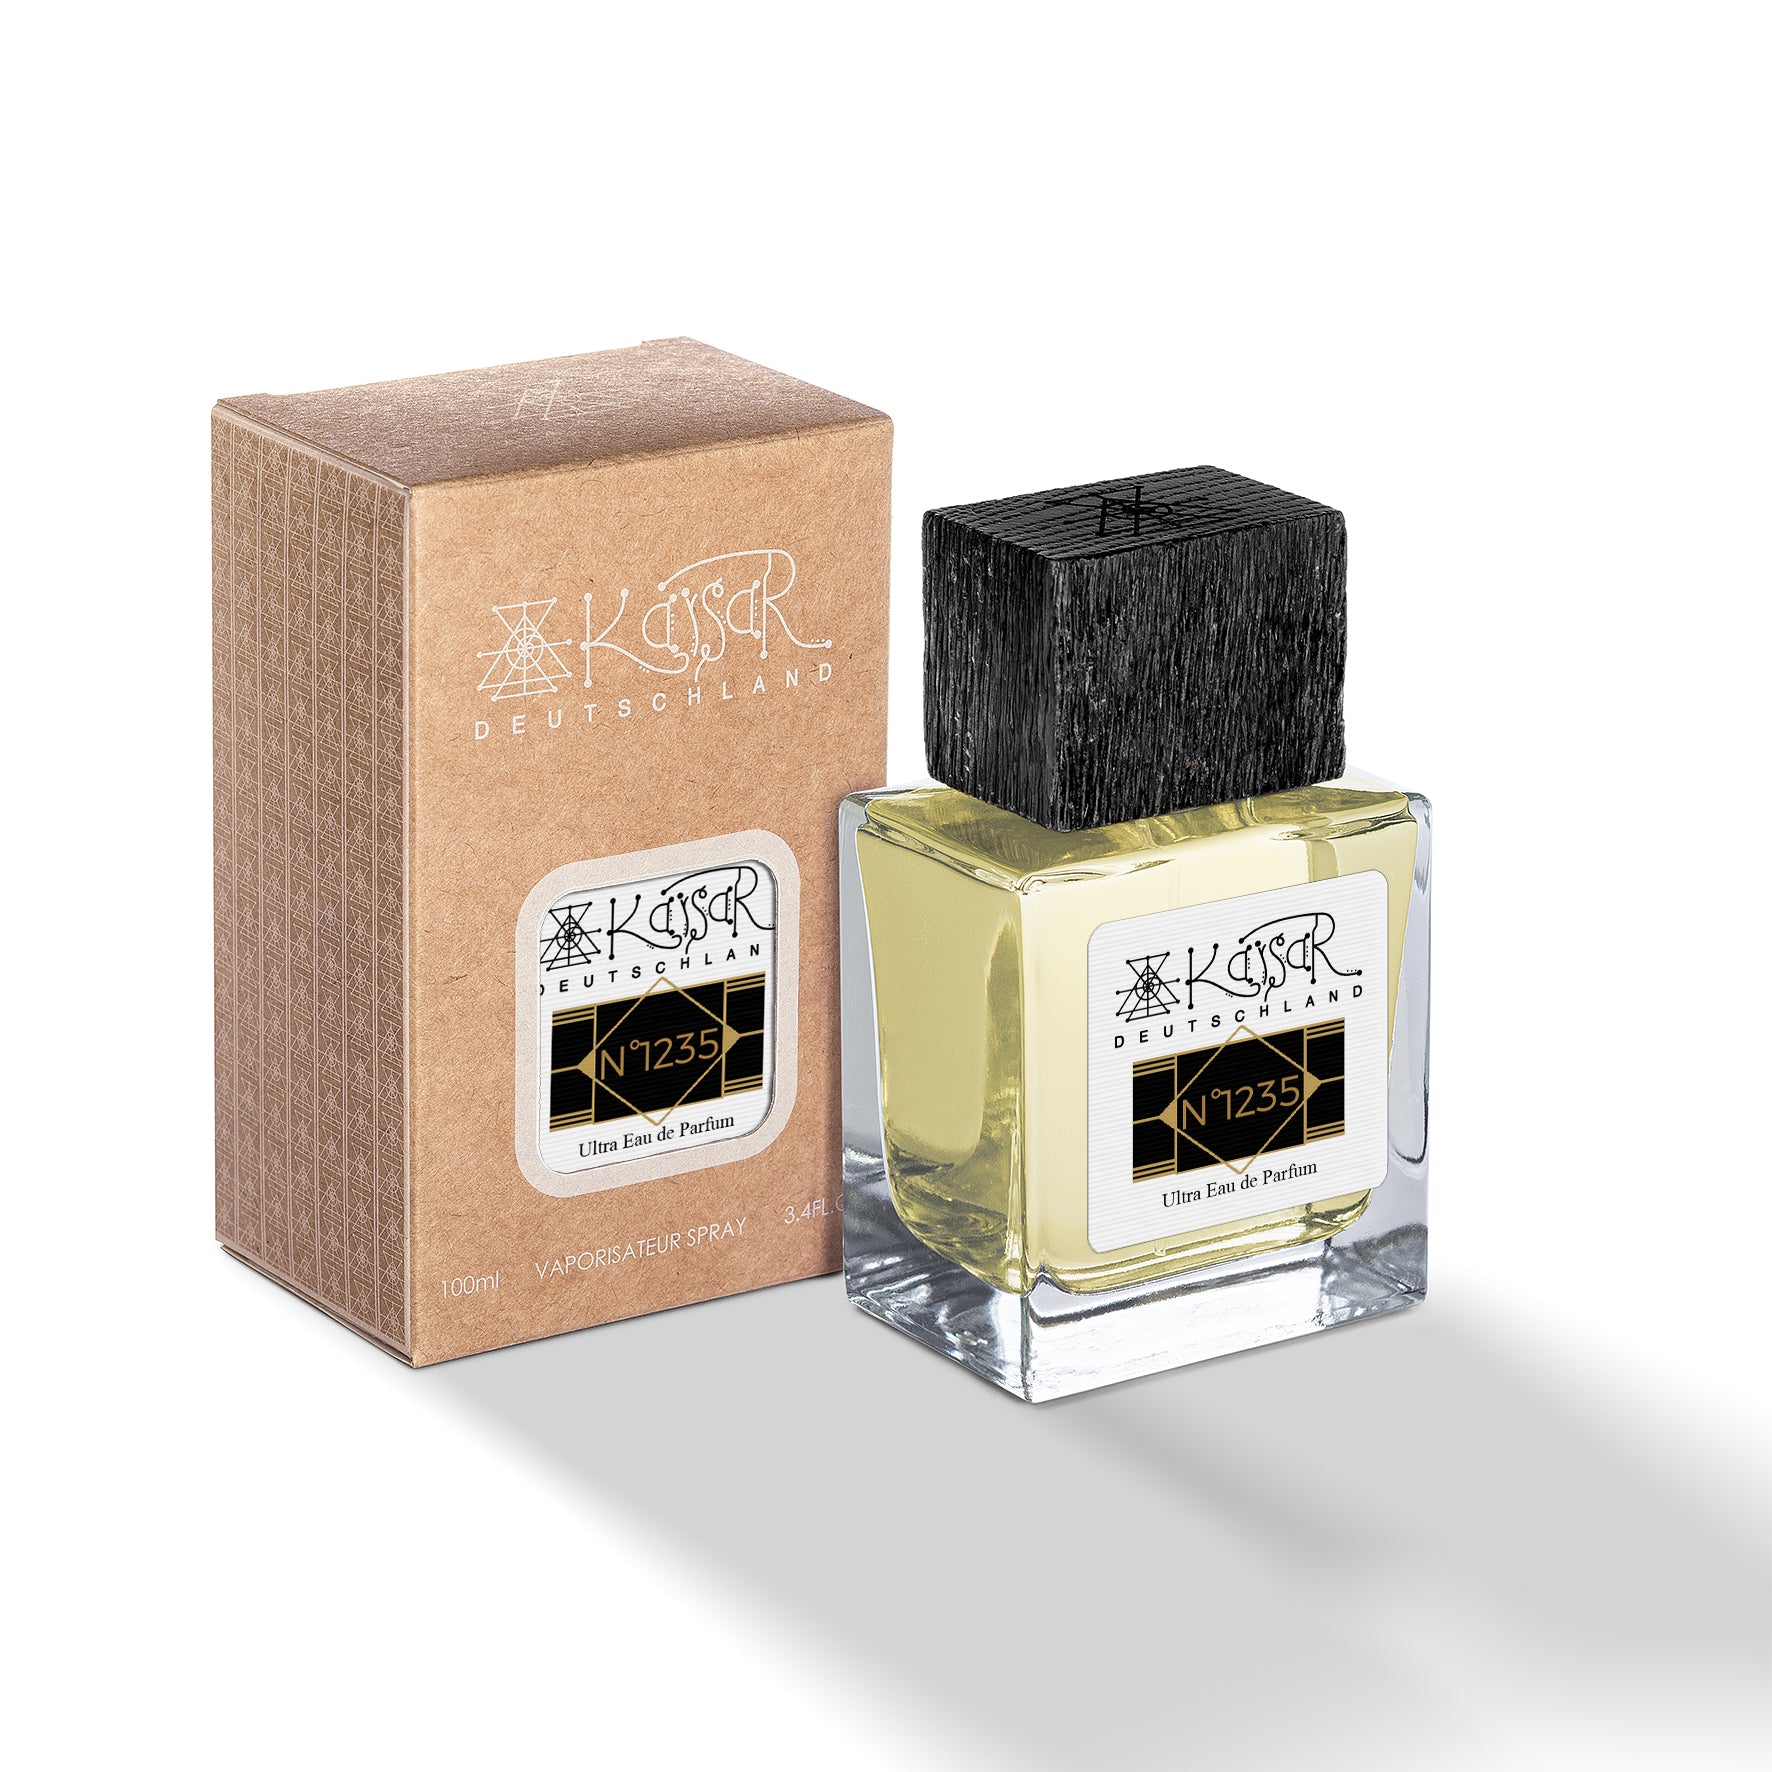 N°1235 Oud Greatness Scent